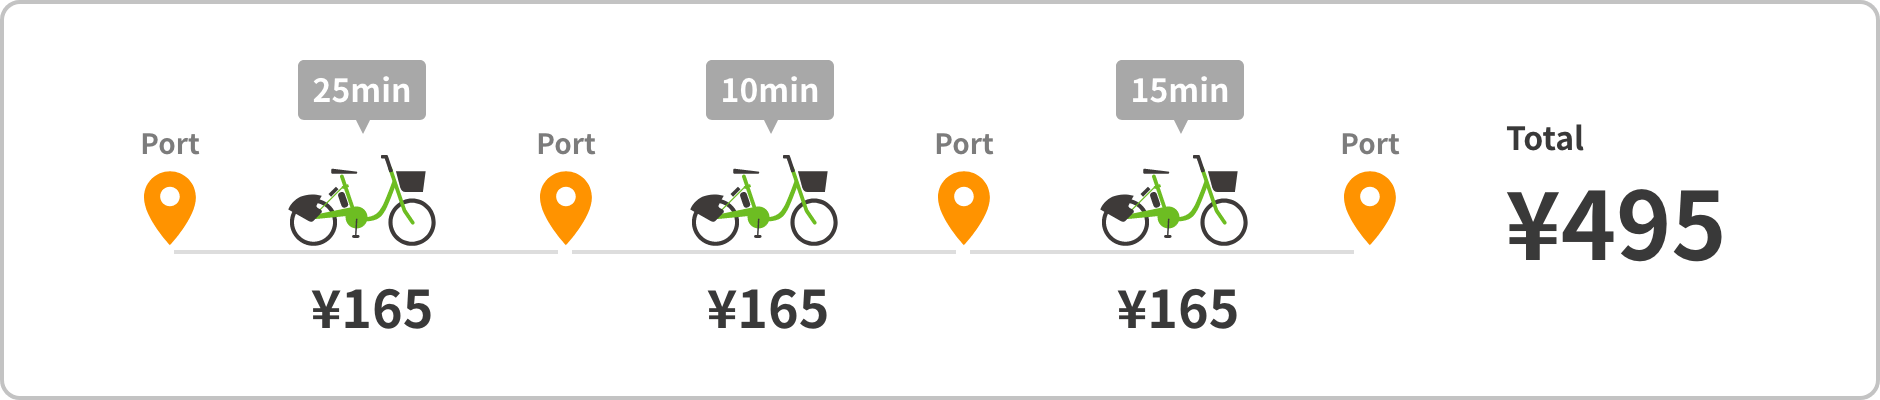 If you return bicycle to the port within 30 minutes, no additional fees will be charged.